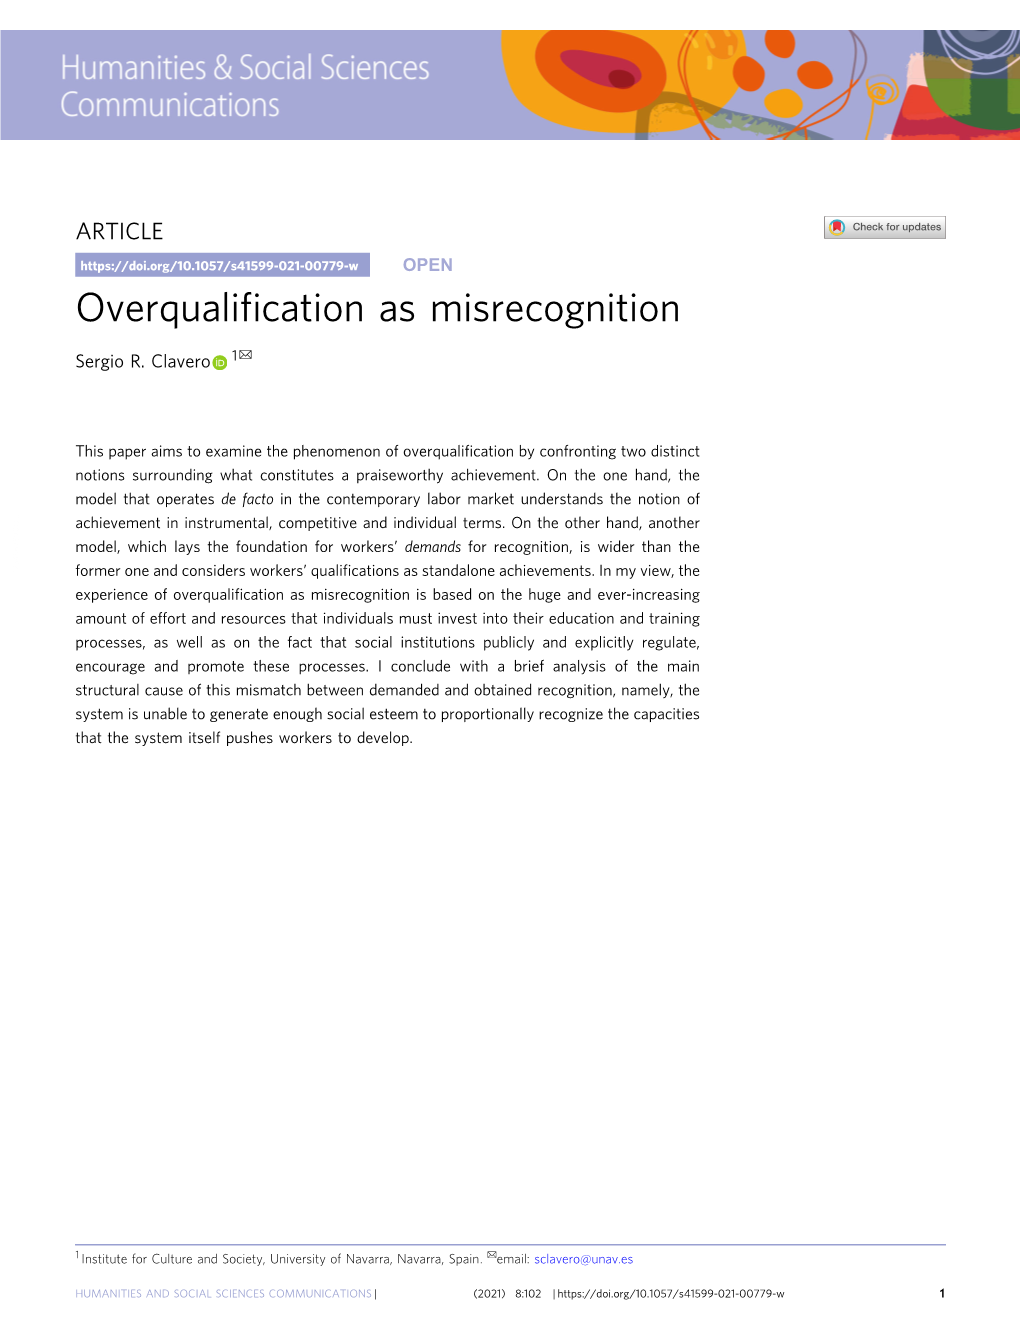 Overqualification As Misrecognition